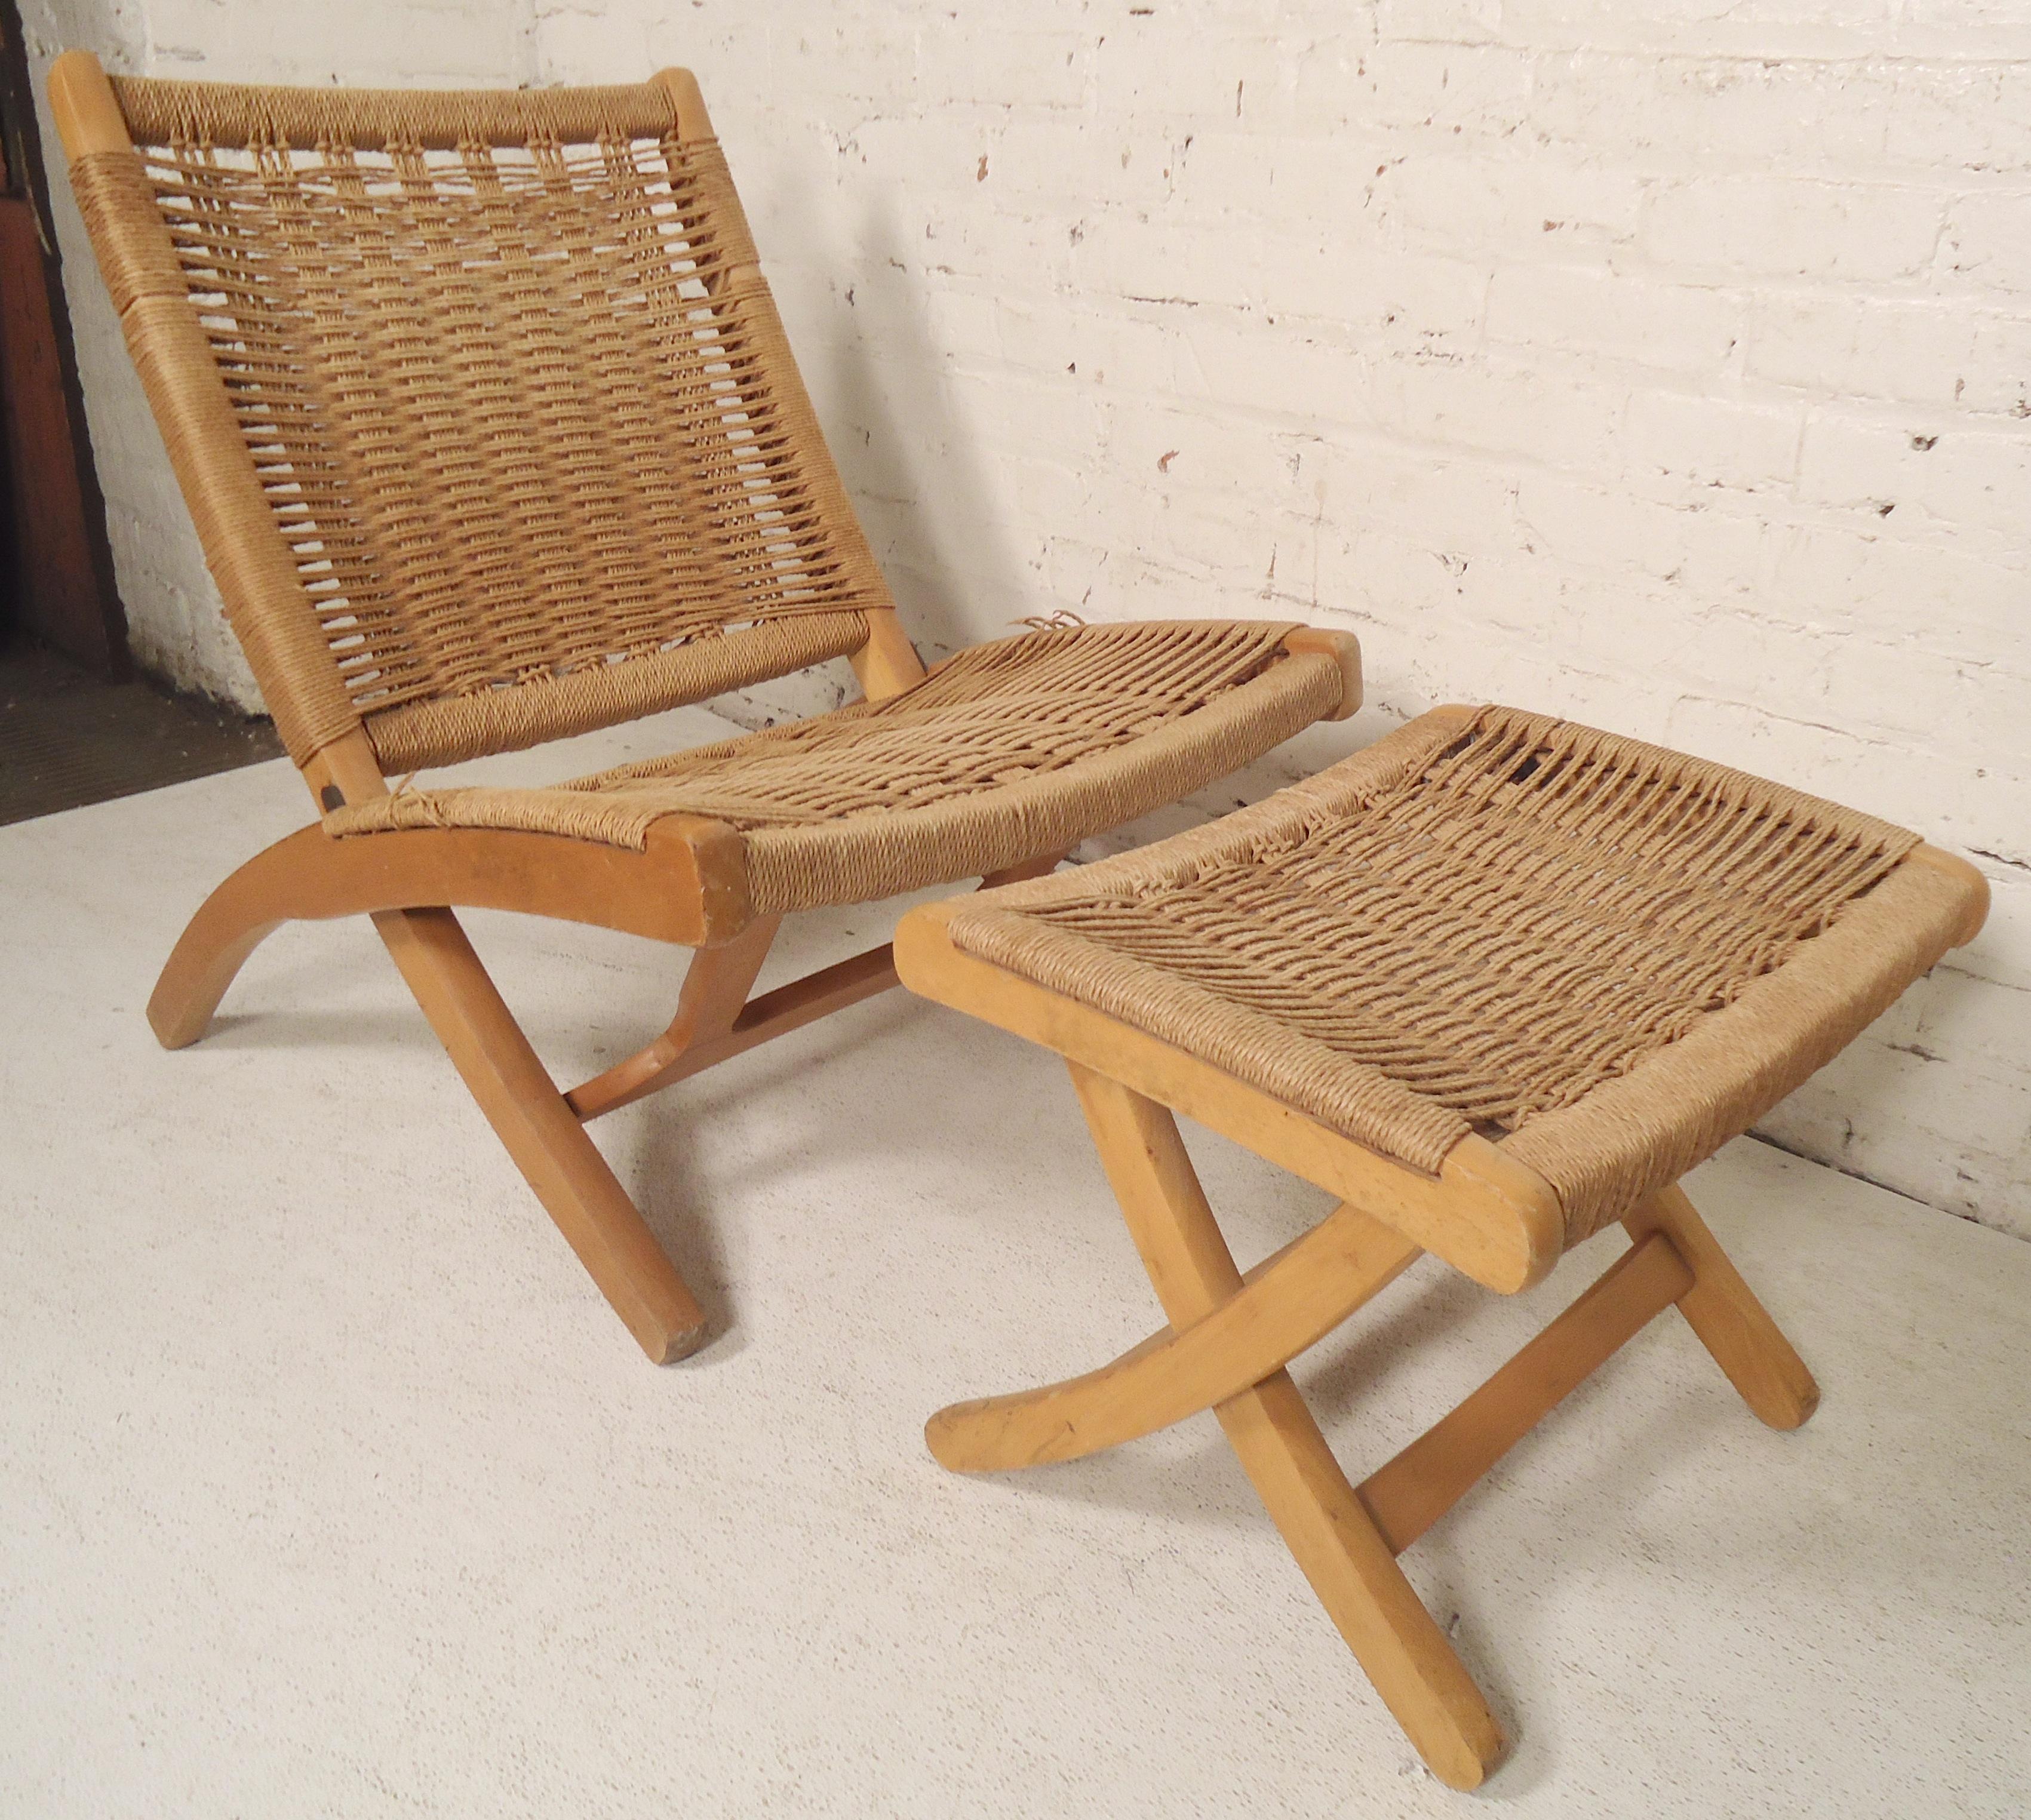 Vintage indoor/outdoor chair and ottoman with woven rope seating. Both fold up for easy storage.

(Please confirm item location - NY or NJ - with dealer).
 